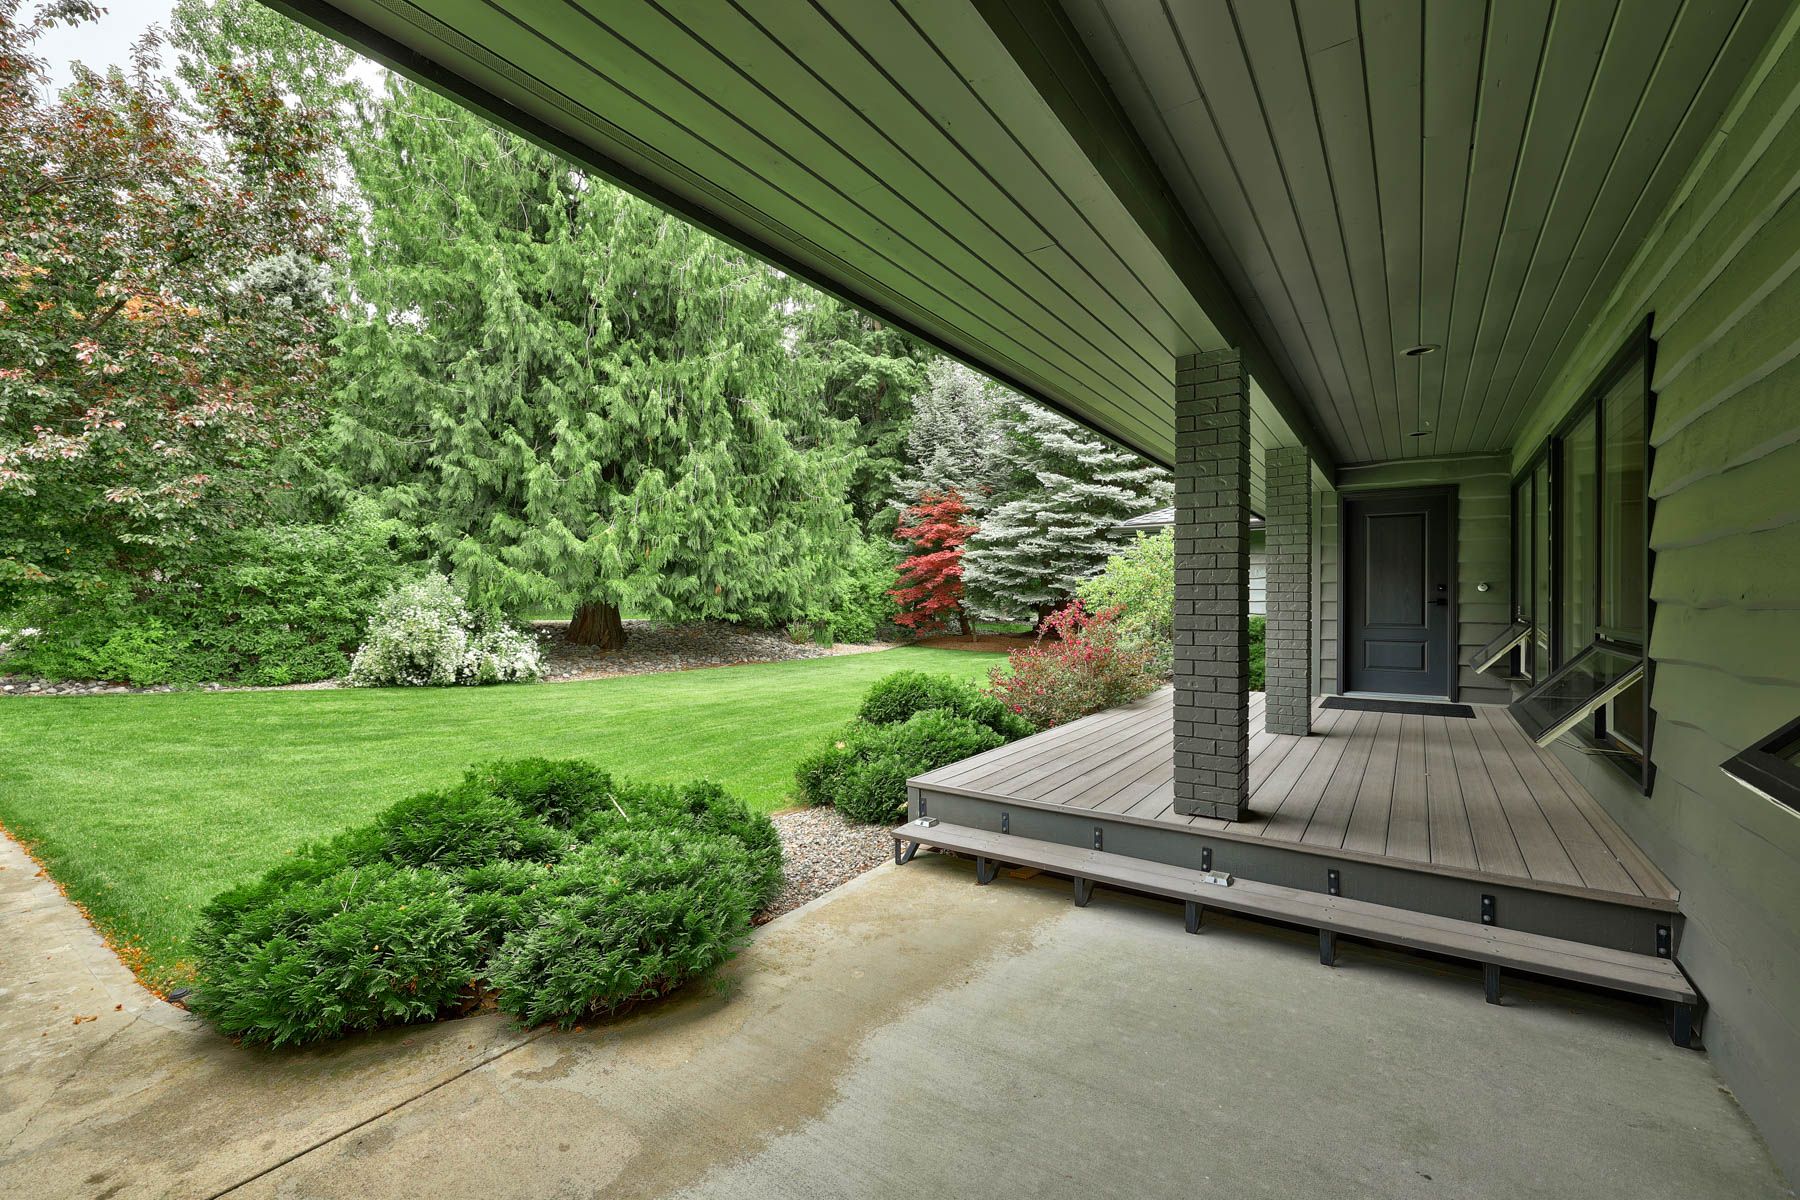 Photo 12: Photos: 3824 Zinck Road in Scotch Creek: House for sale : MLS®# 10233226